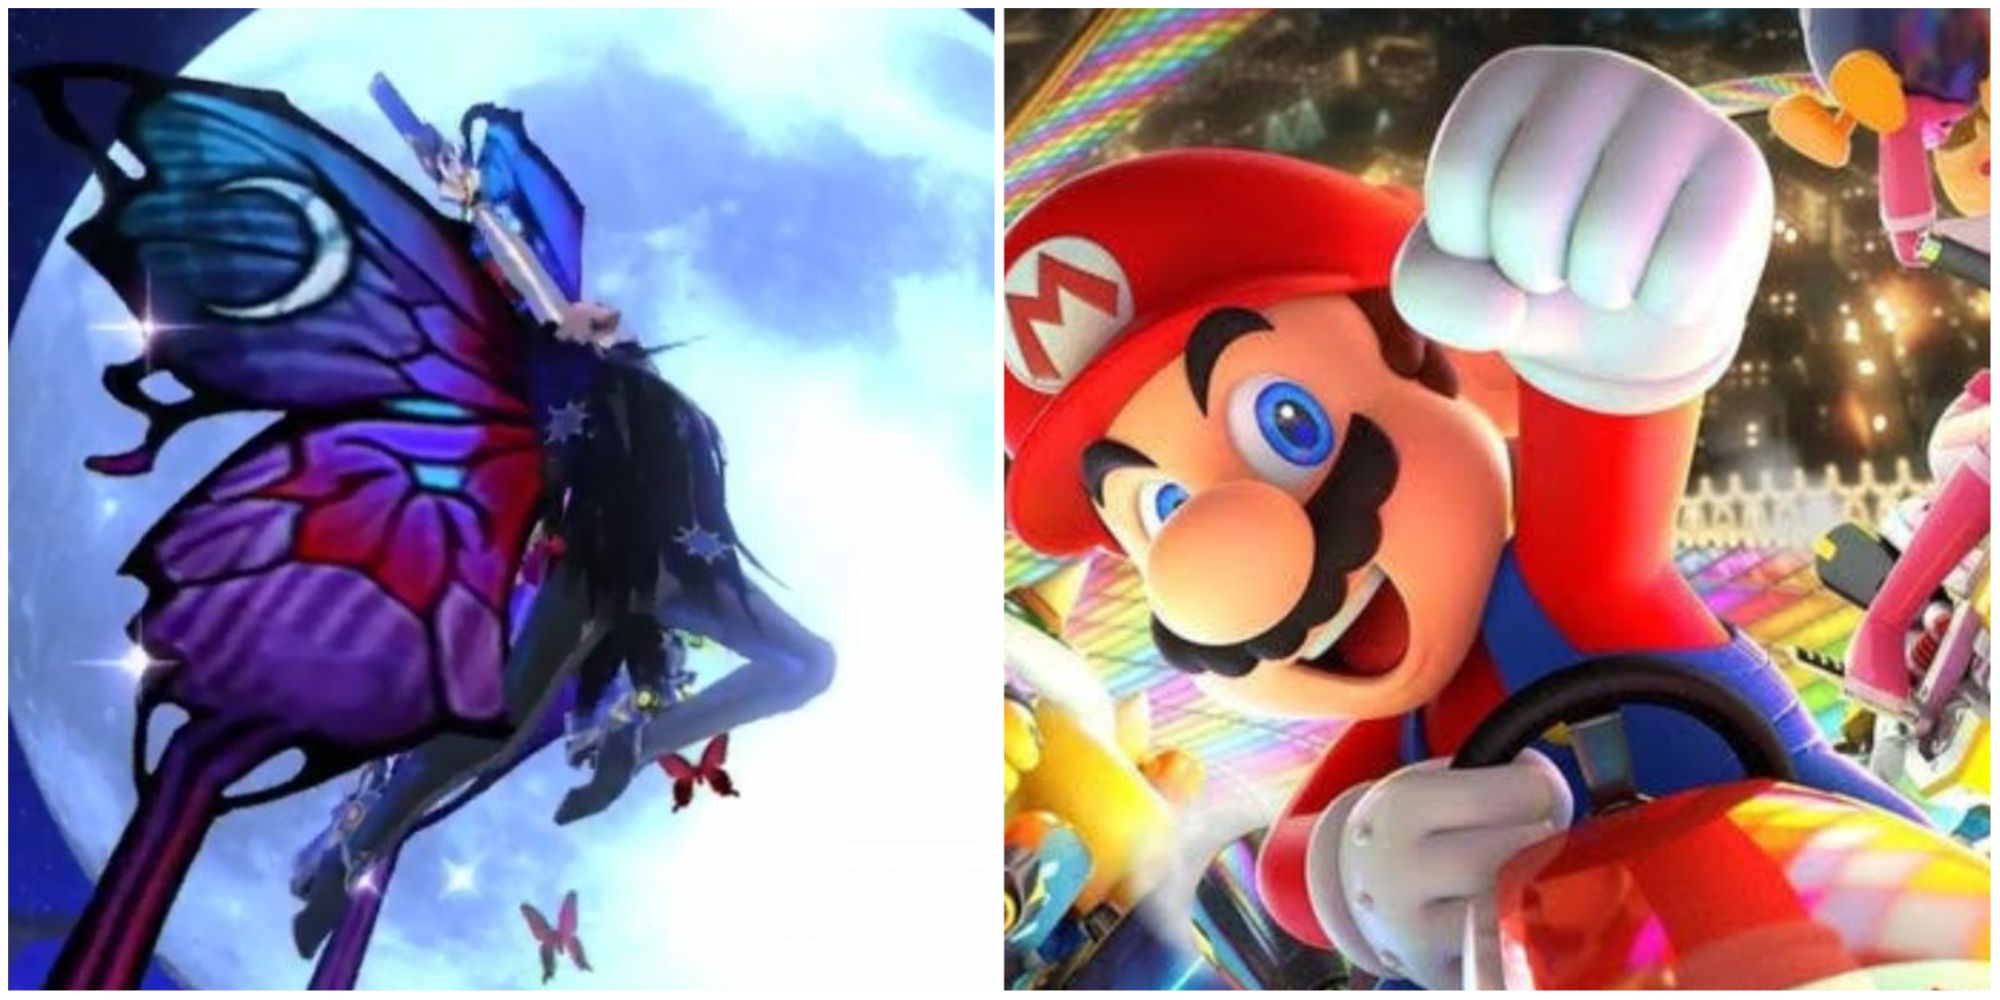 Bayonetta with her butterfly wings in Smash and Mario on the cover of Mario Kart 8